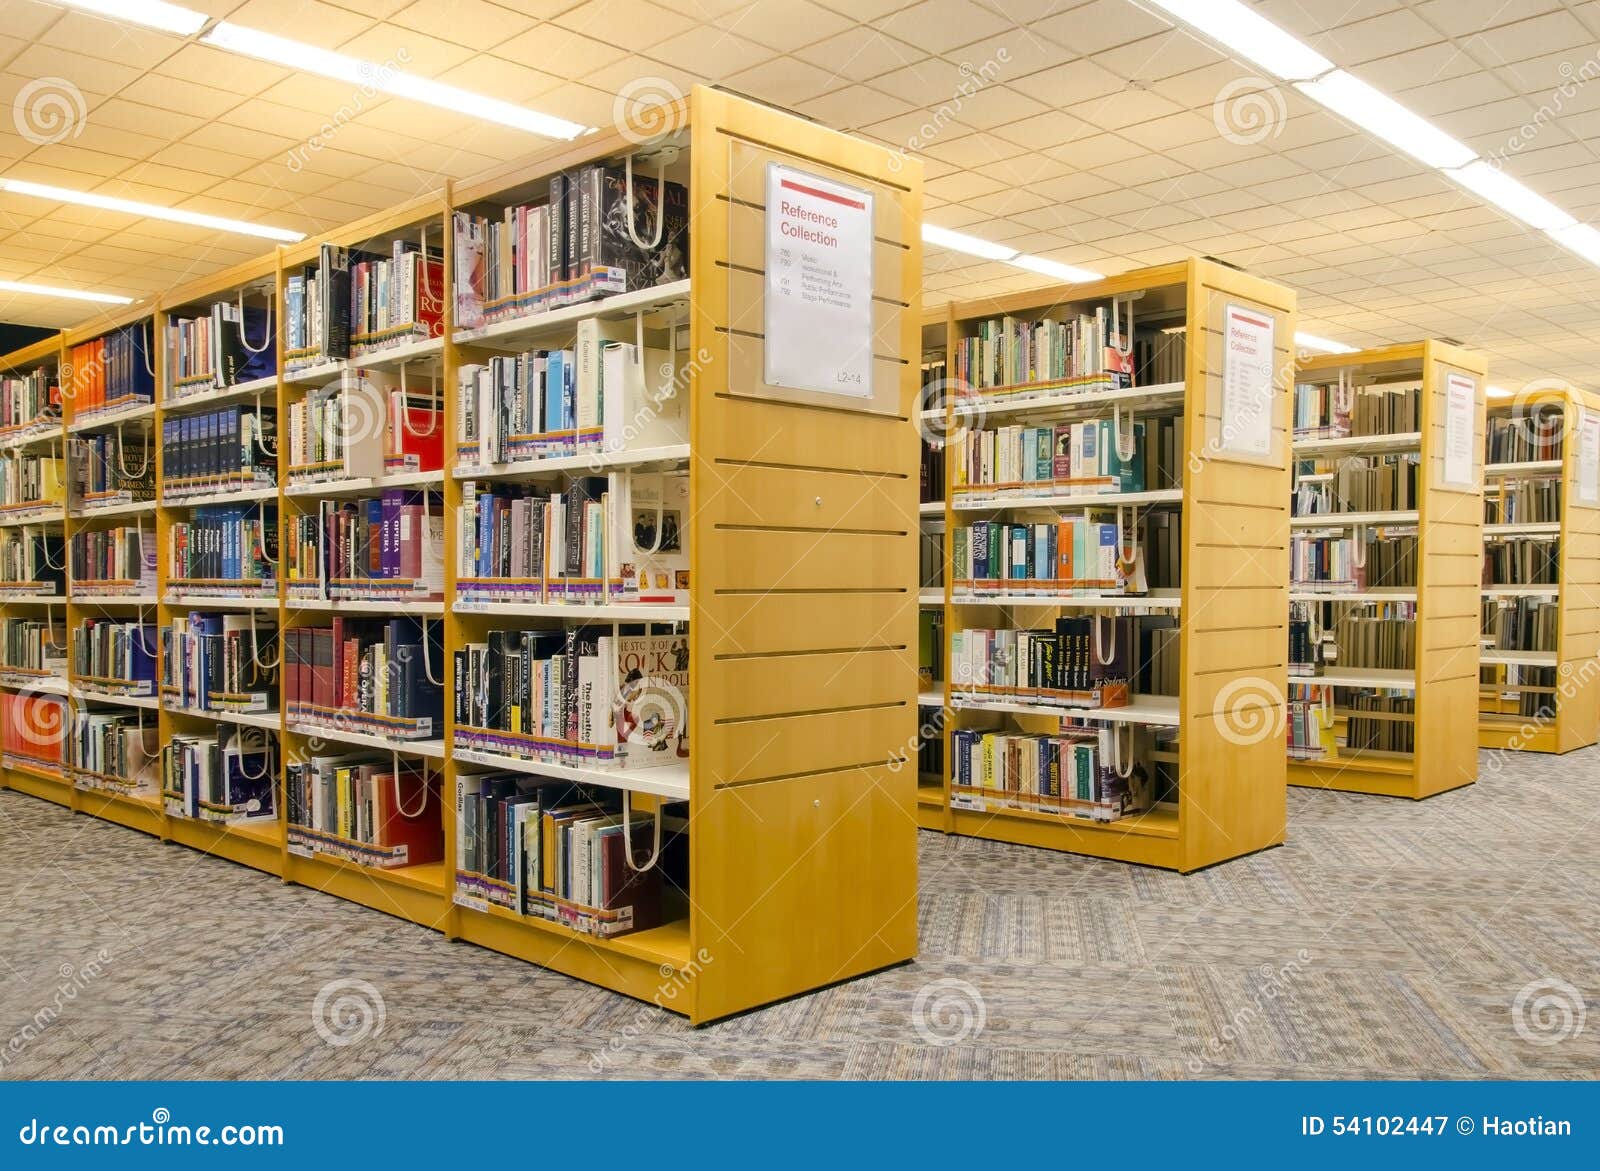 https://thumbs.dreamstime.com/z/modern-library-reference-section-54102447.jpg